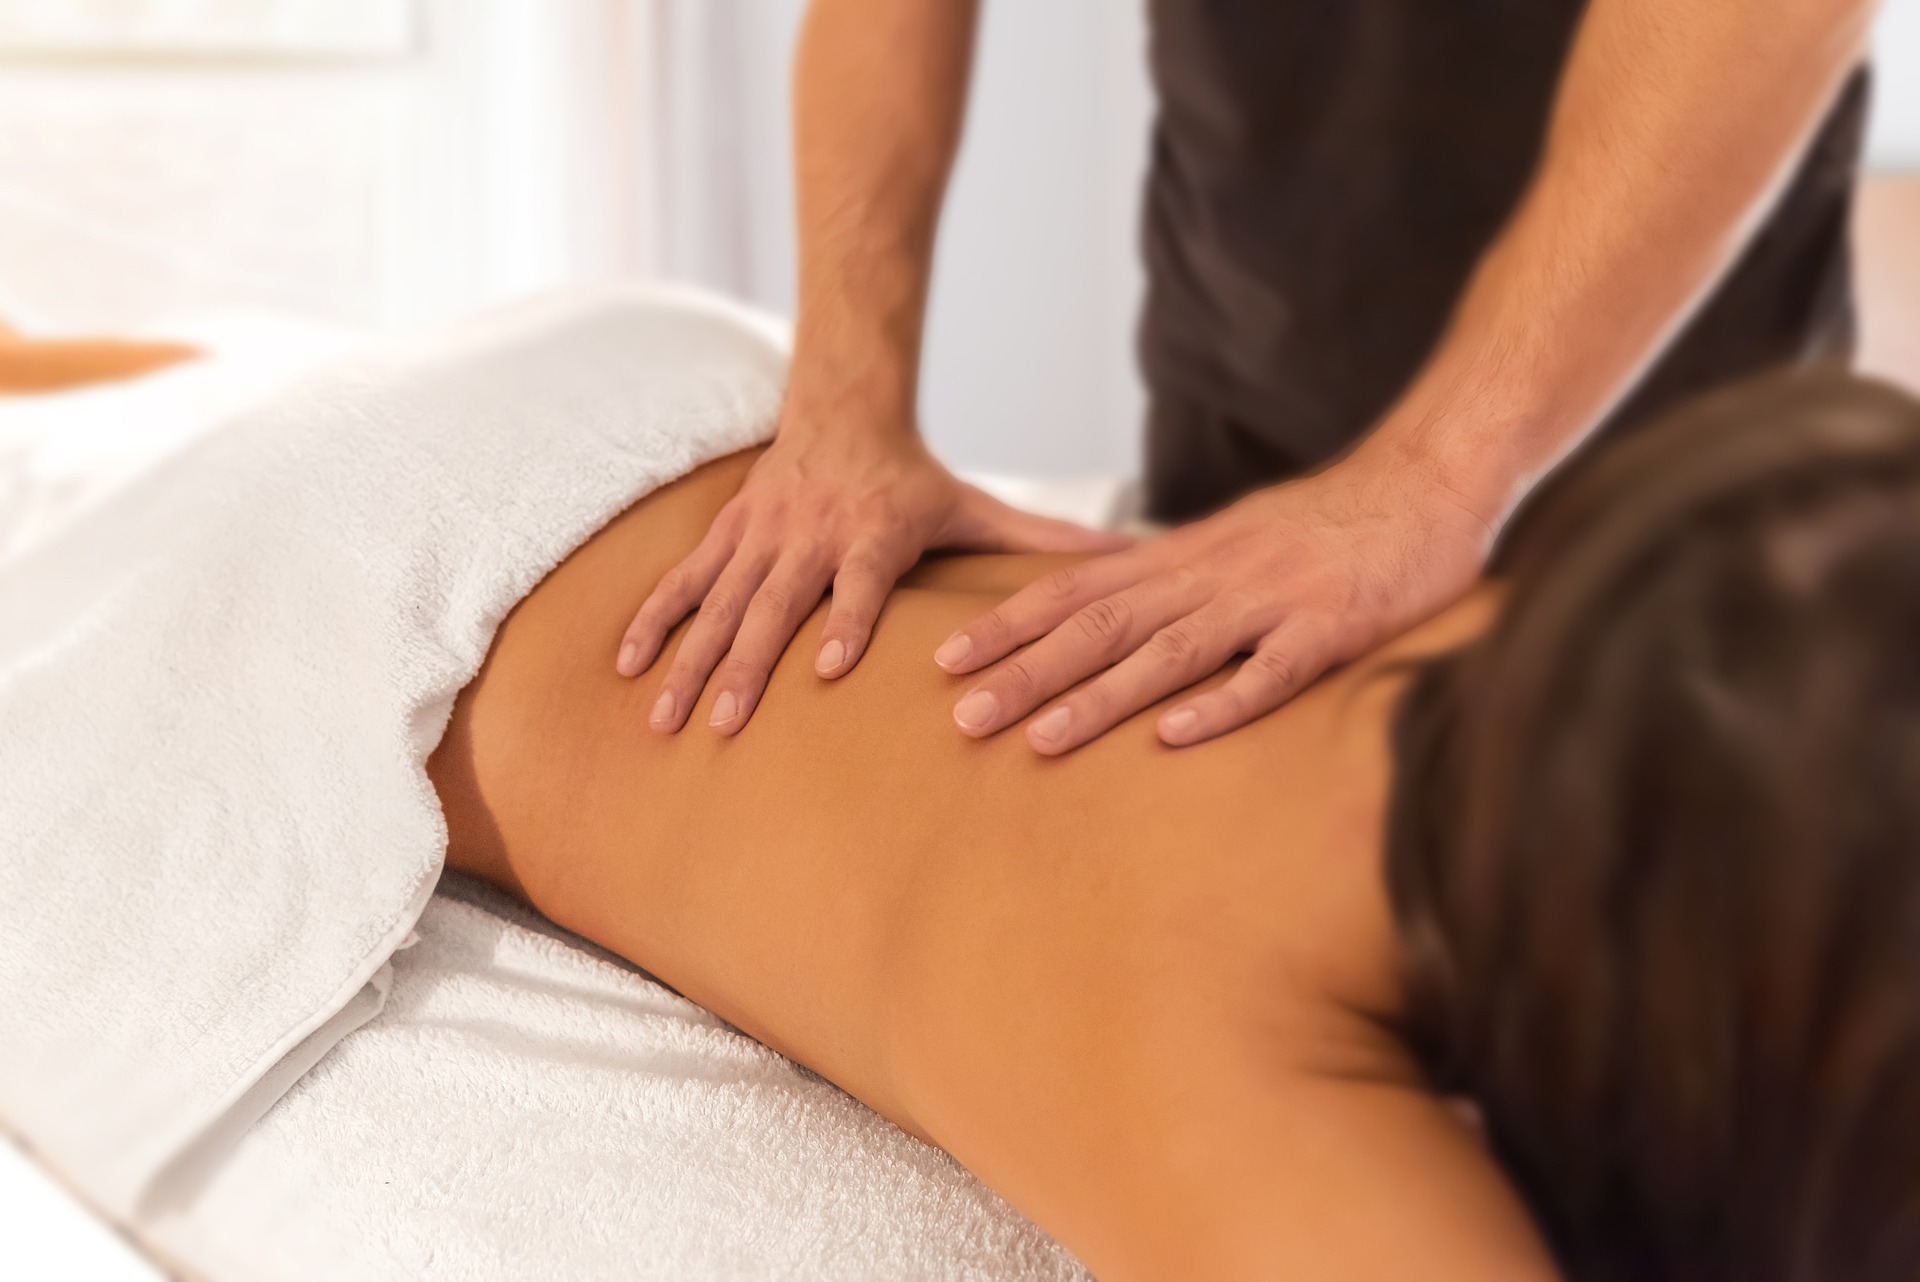 Real-World Massage Therapy is Effective for Treating Lower Back Pain